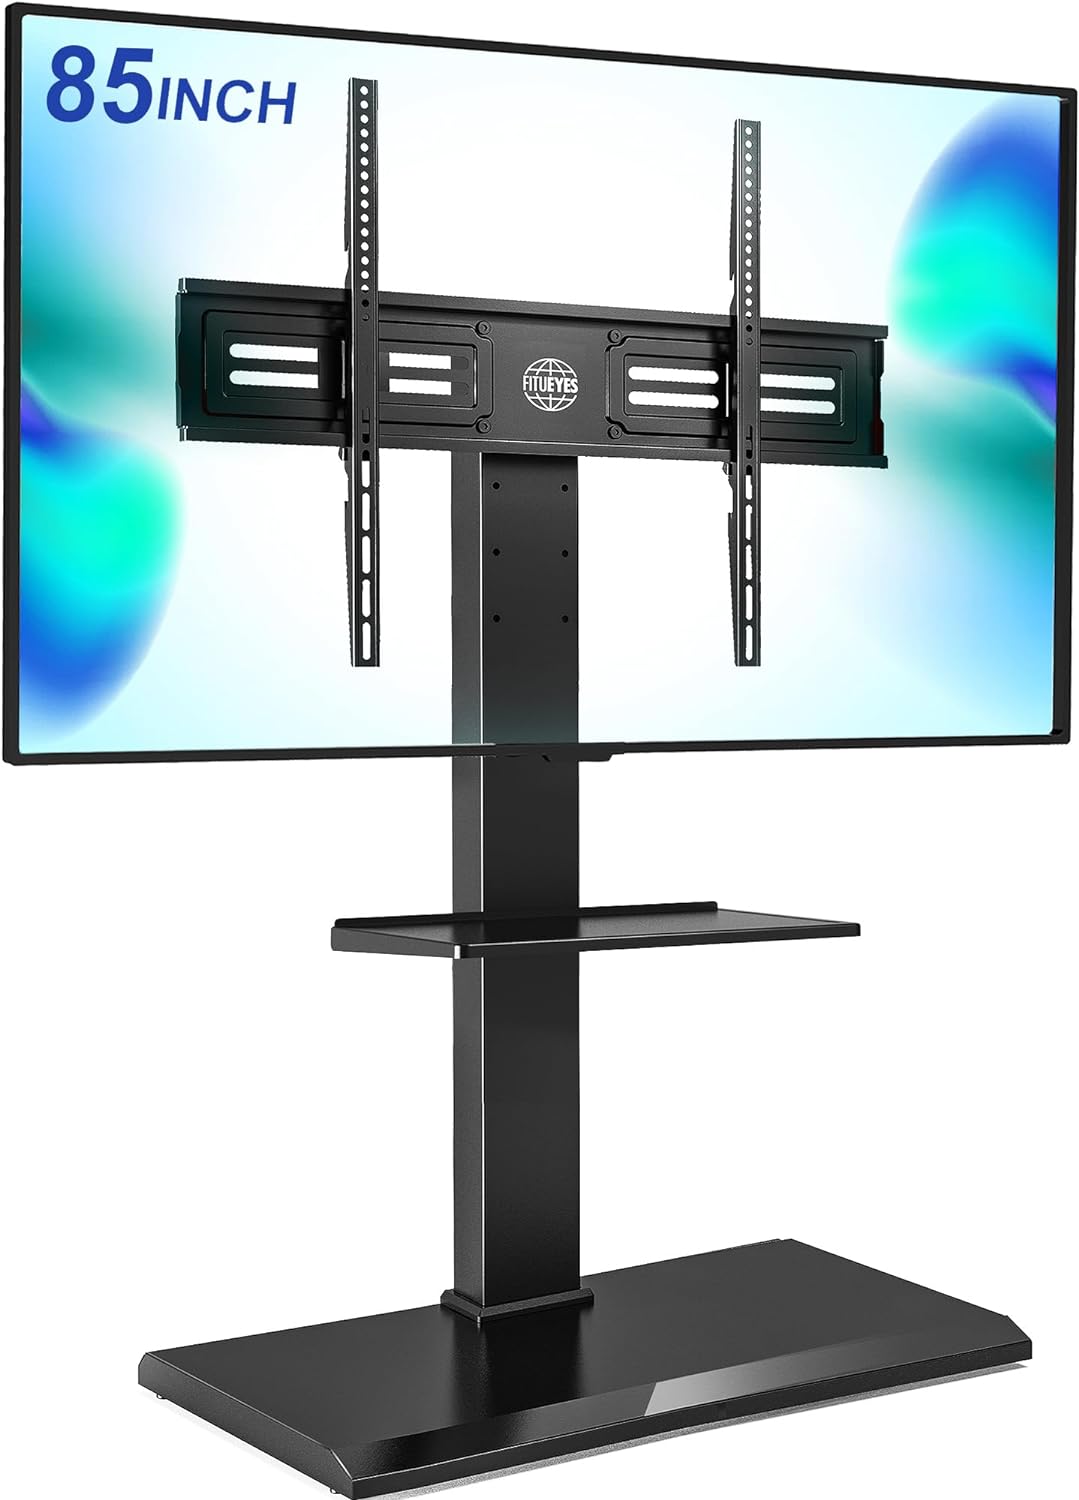 FITUEYES Floor TV Stand Iron Base with Swivel Mount for 50-85 Inch Large LCD/LED TVs Adjustable Shelf Tall Corner TV Stands for Bedroom and Living Room Hold Up to 110 lbs Black